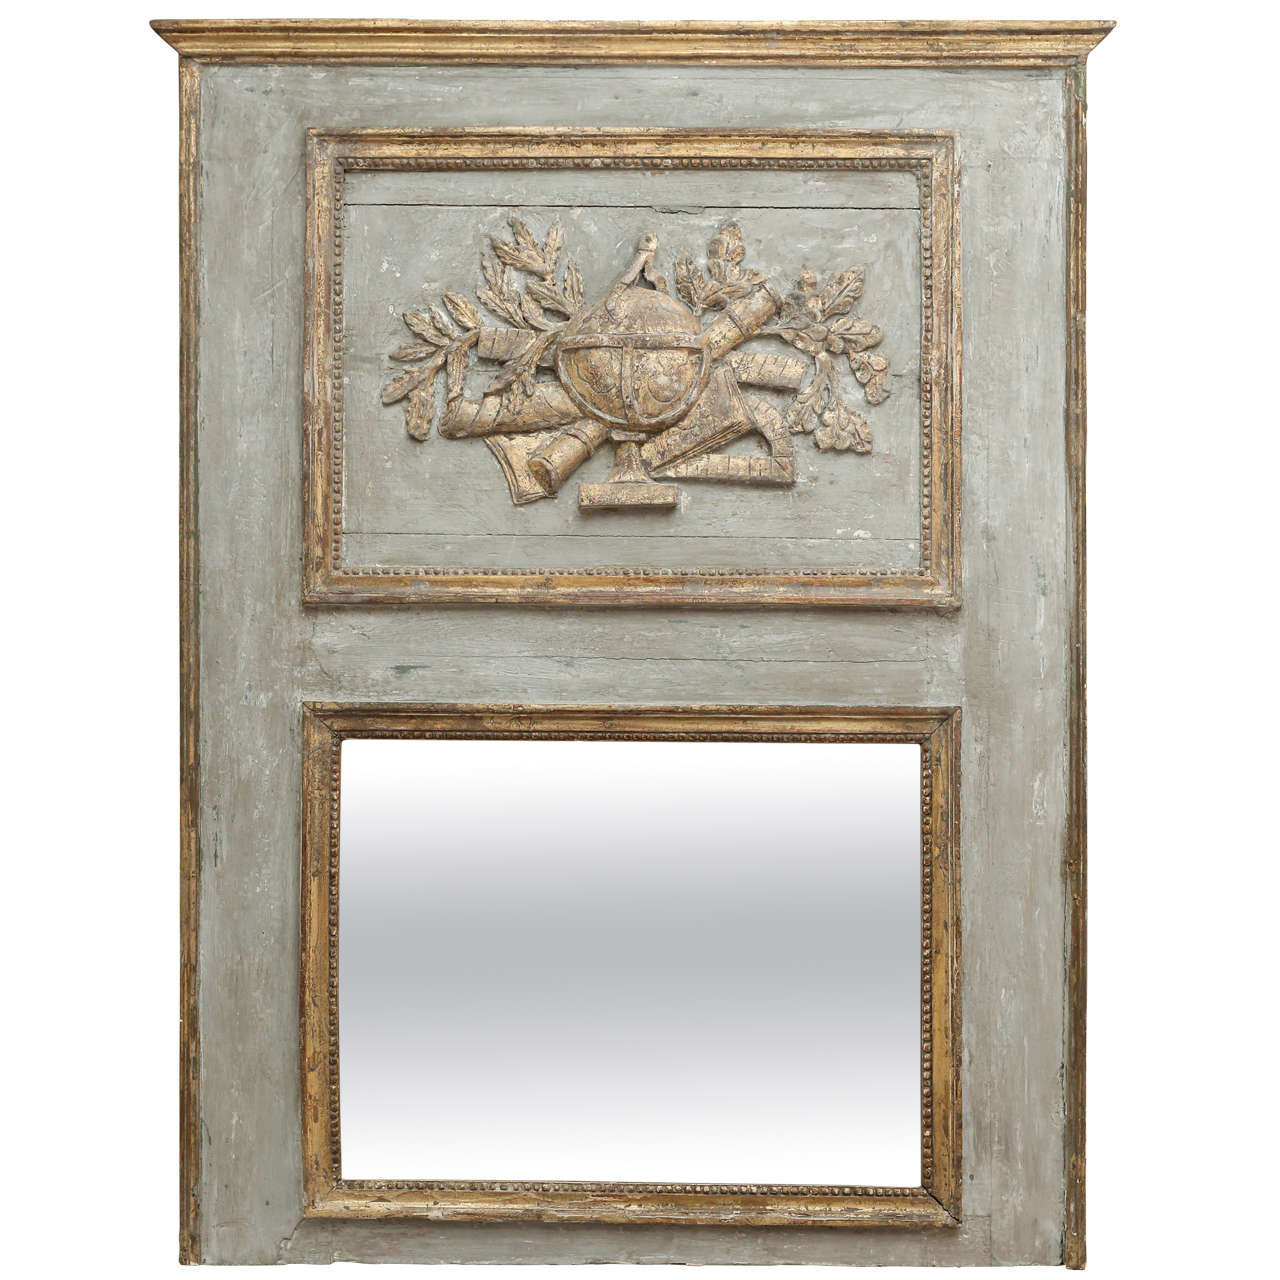 18th Century Painted Trumeau Mirror with Bois Doré Detail